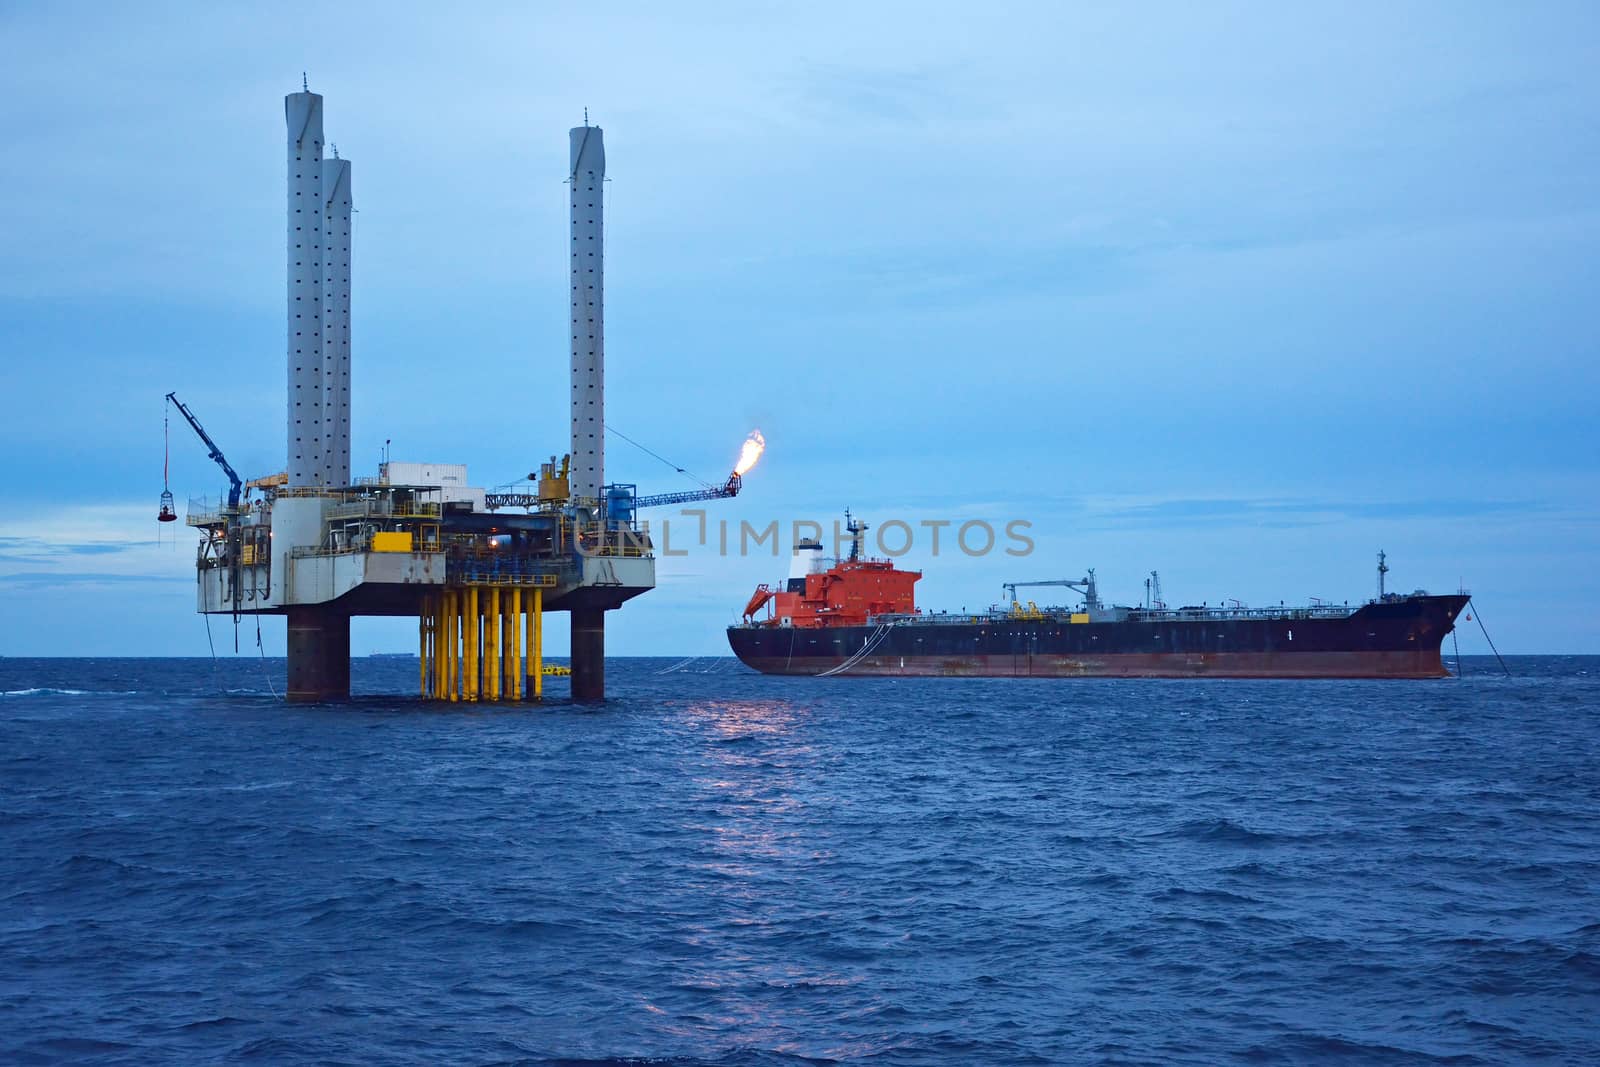 The offshore oil rig in early morning, Gulf of Thailand. by think4photop